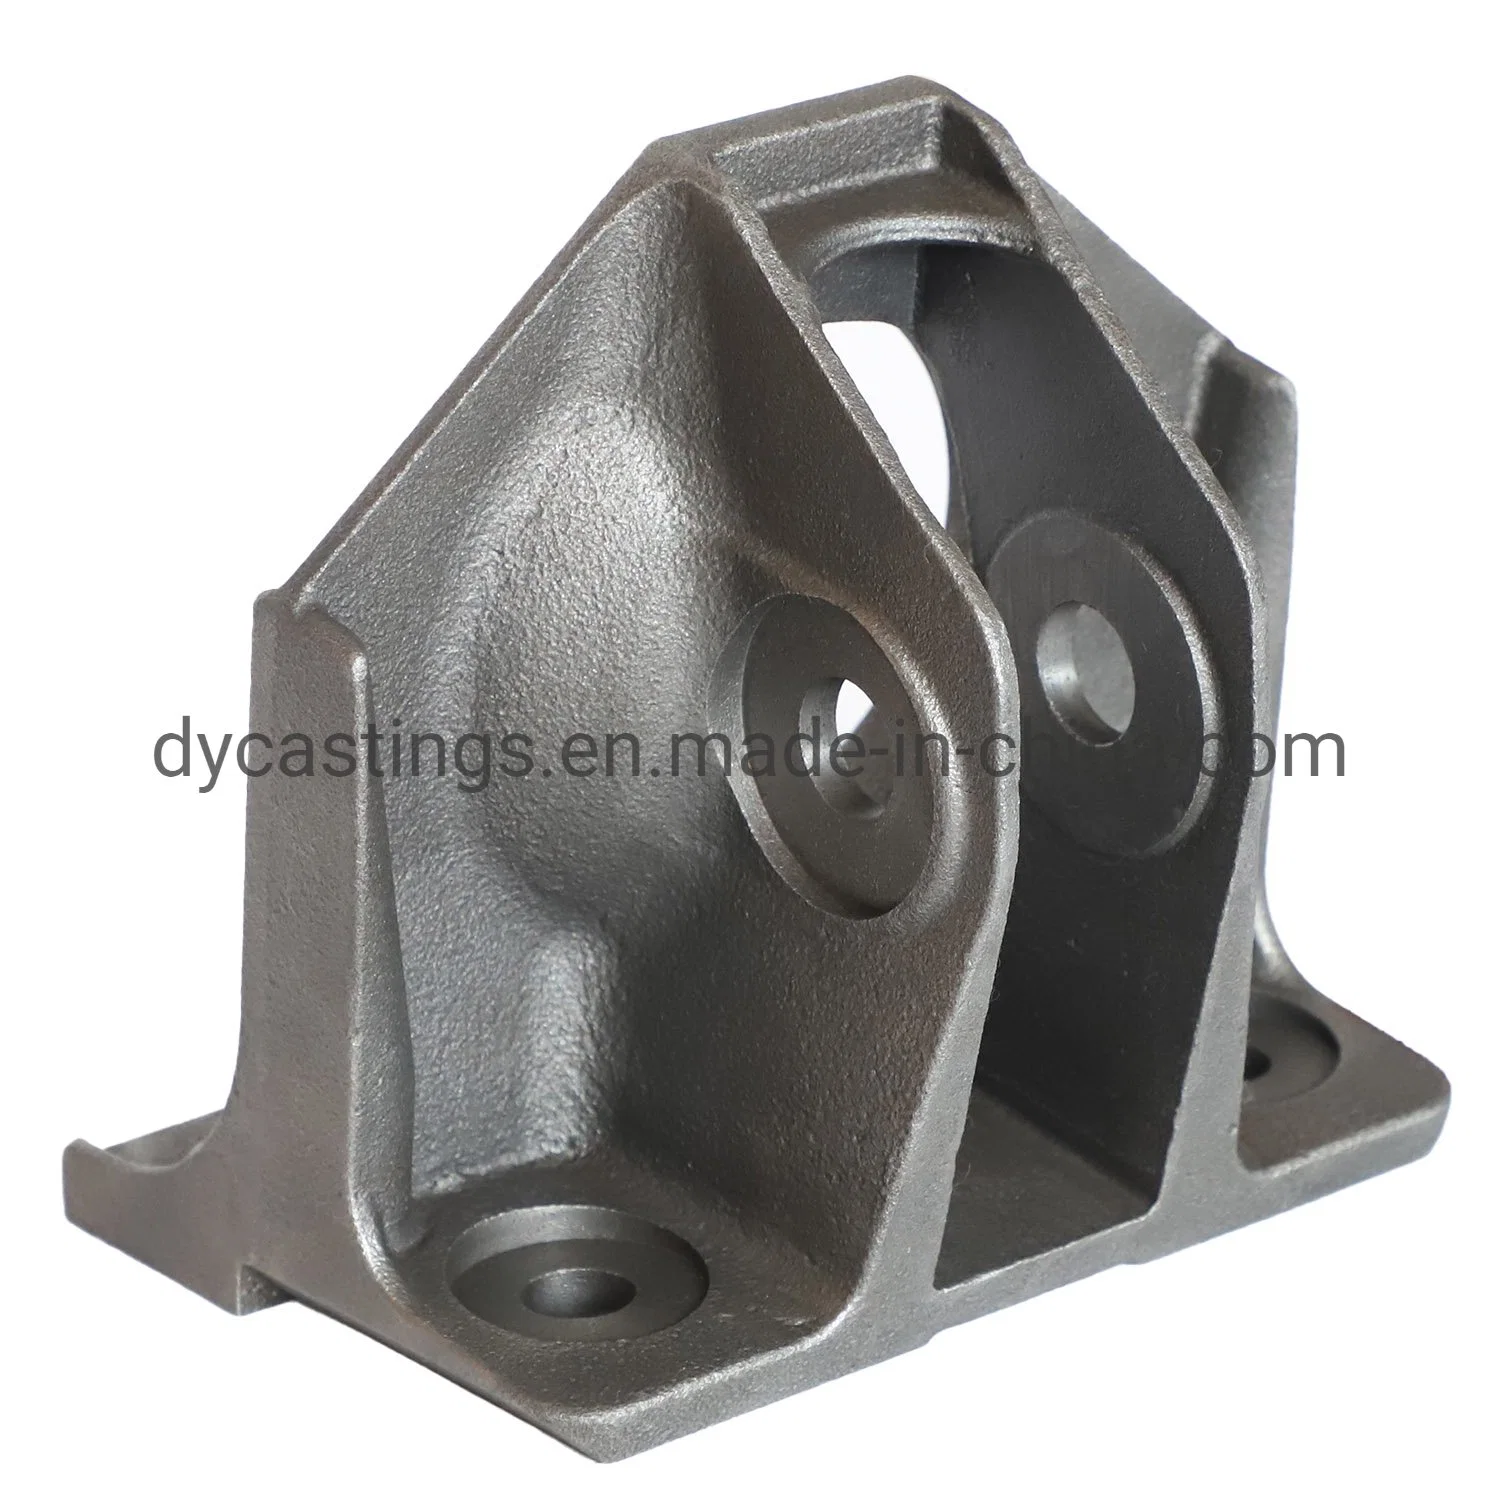 High quality/High cost performance  Cast Iron Tractor Bracket Support Agricultural Part